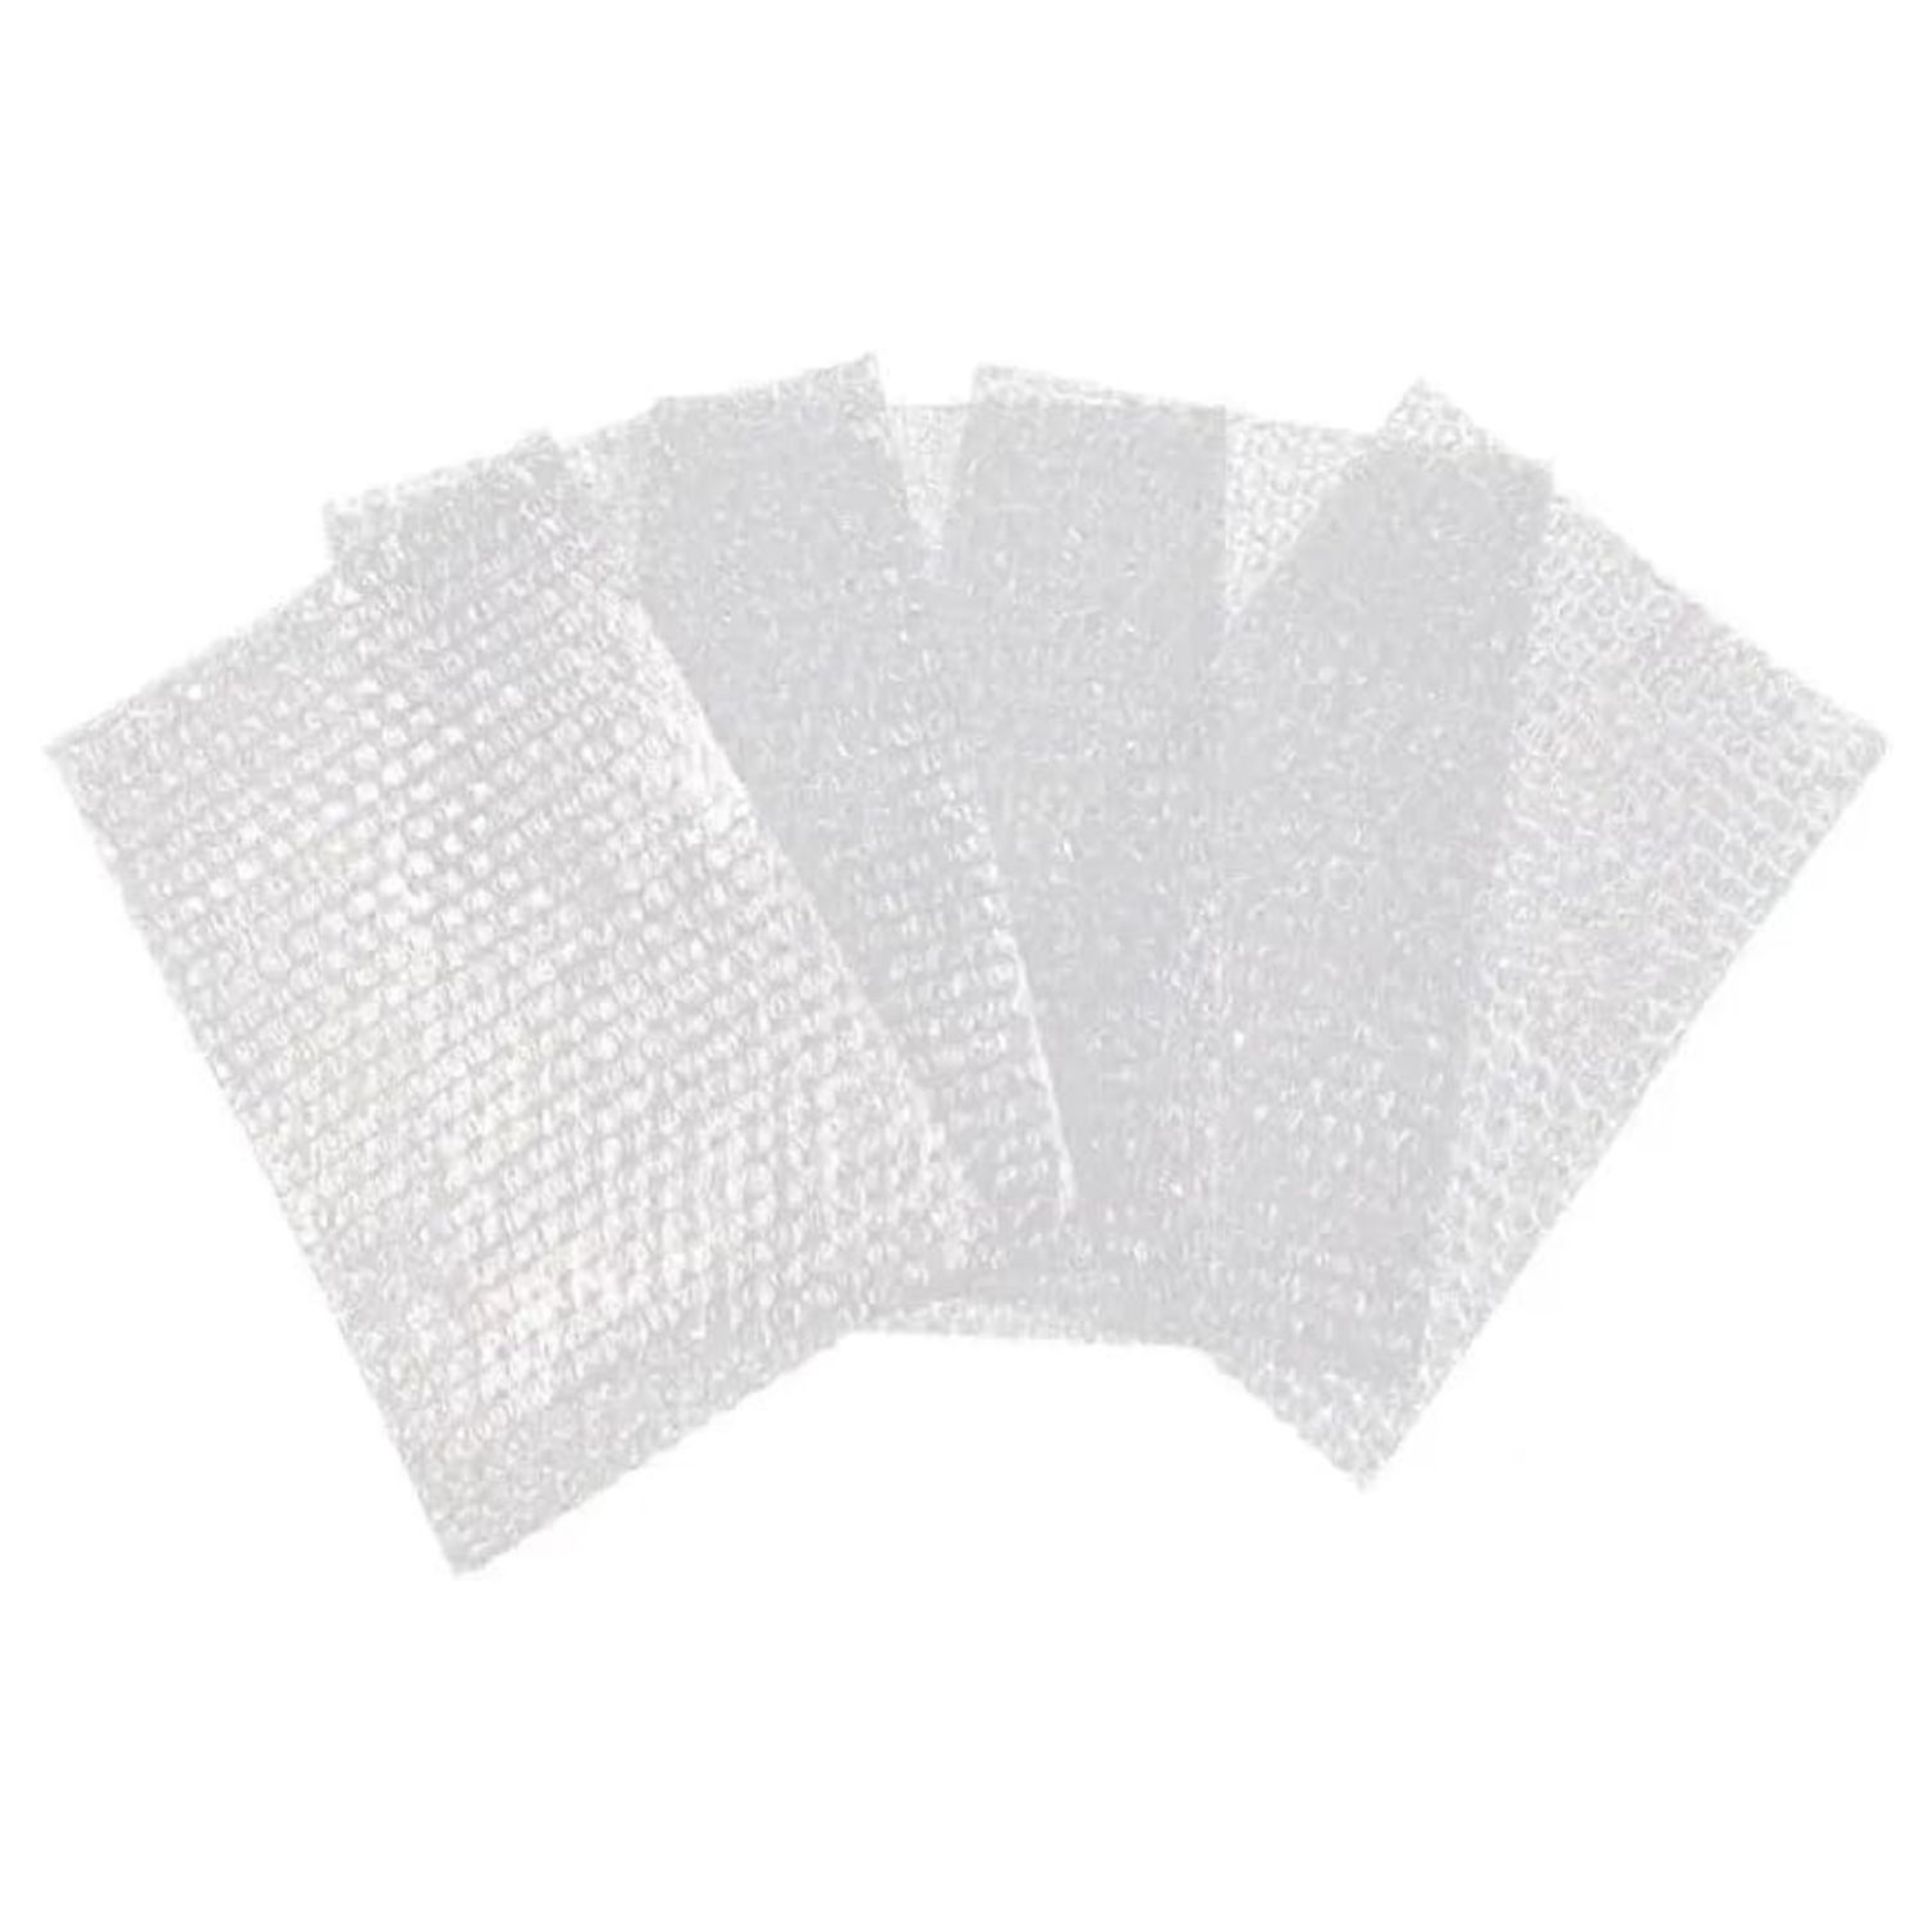 10 BOXES OF 100 PEEL AND SEAL BUBBLE WRAP PREMIUM CLEAR POUCH BAGS, 130X185MM - Image 2 of 4